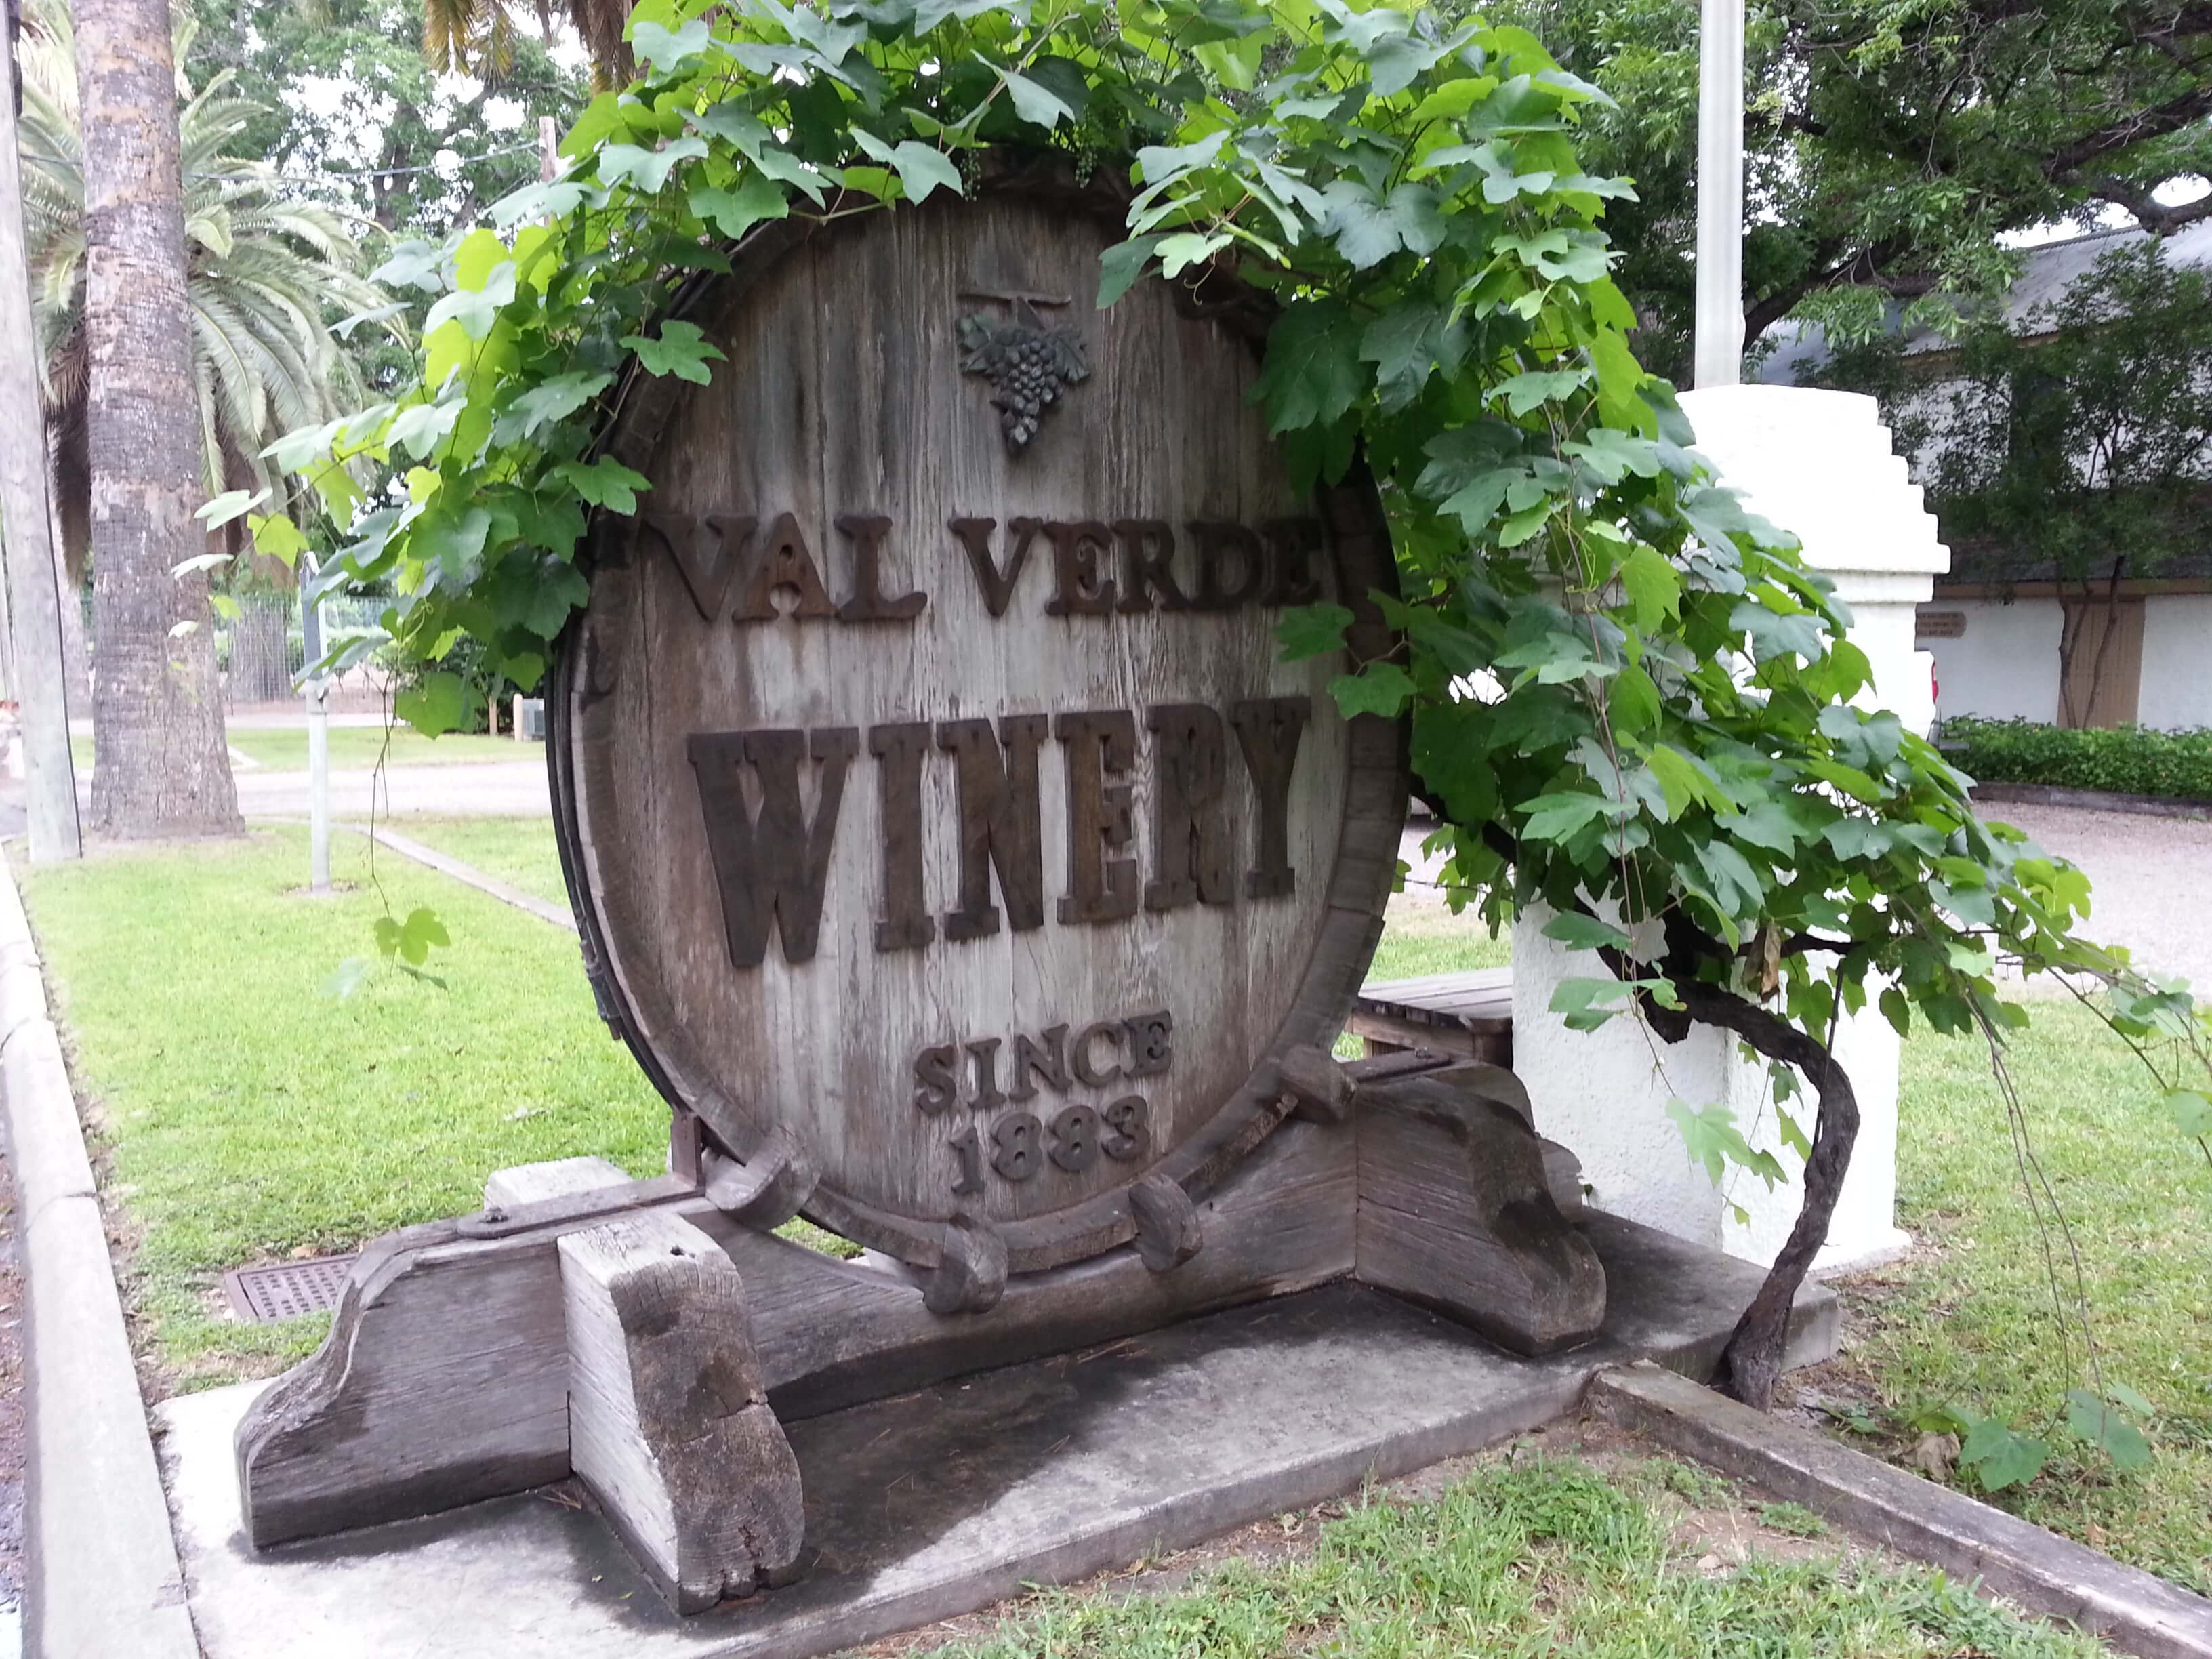 Val Verde Winery Sign